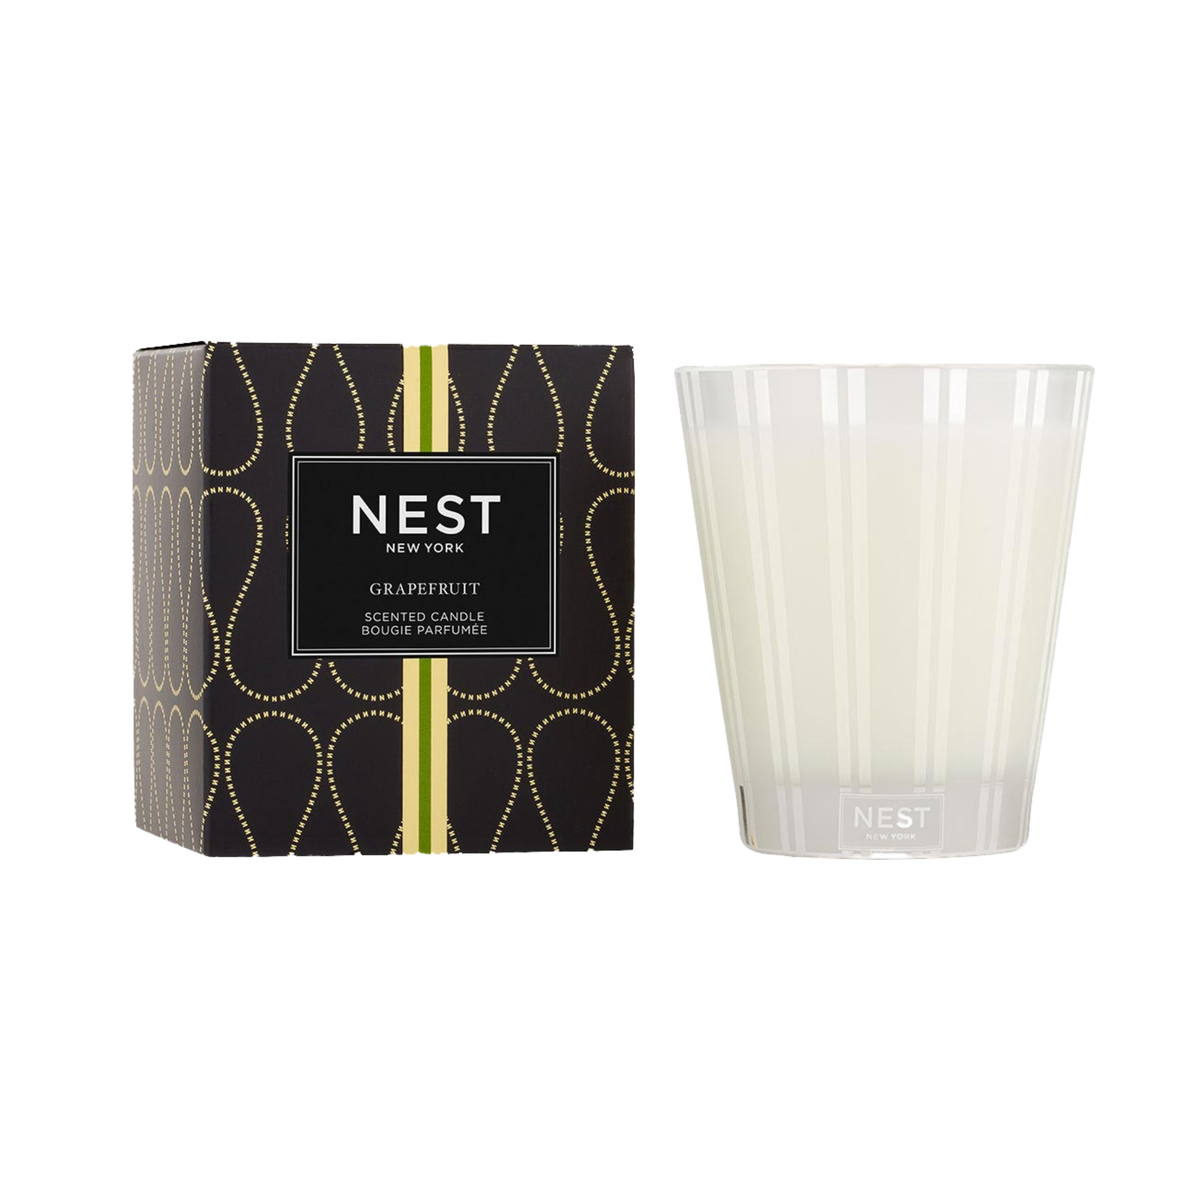 Product Image of Nest New York’s Grapefruit Classic Candle with Box